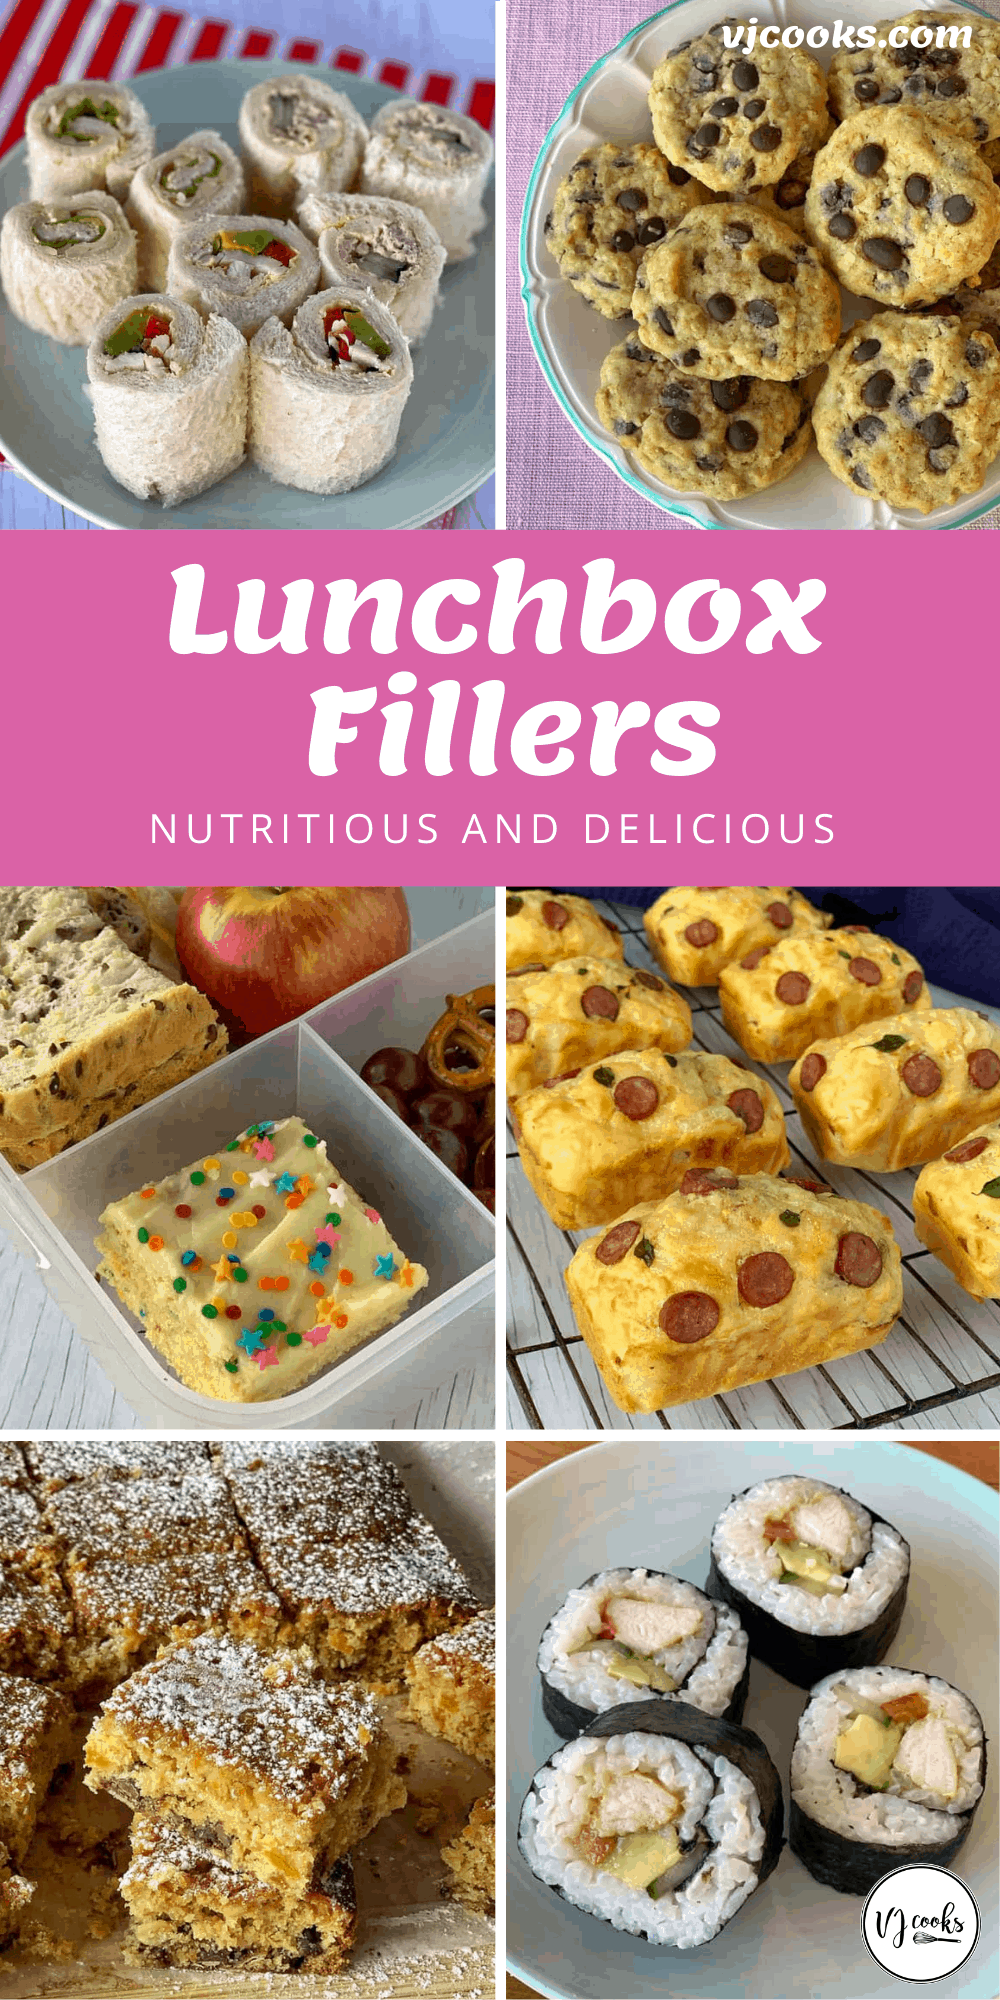 lunchbox fillers